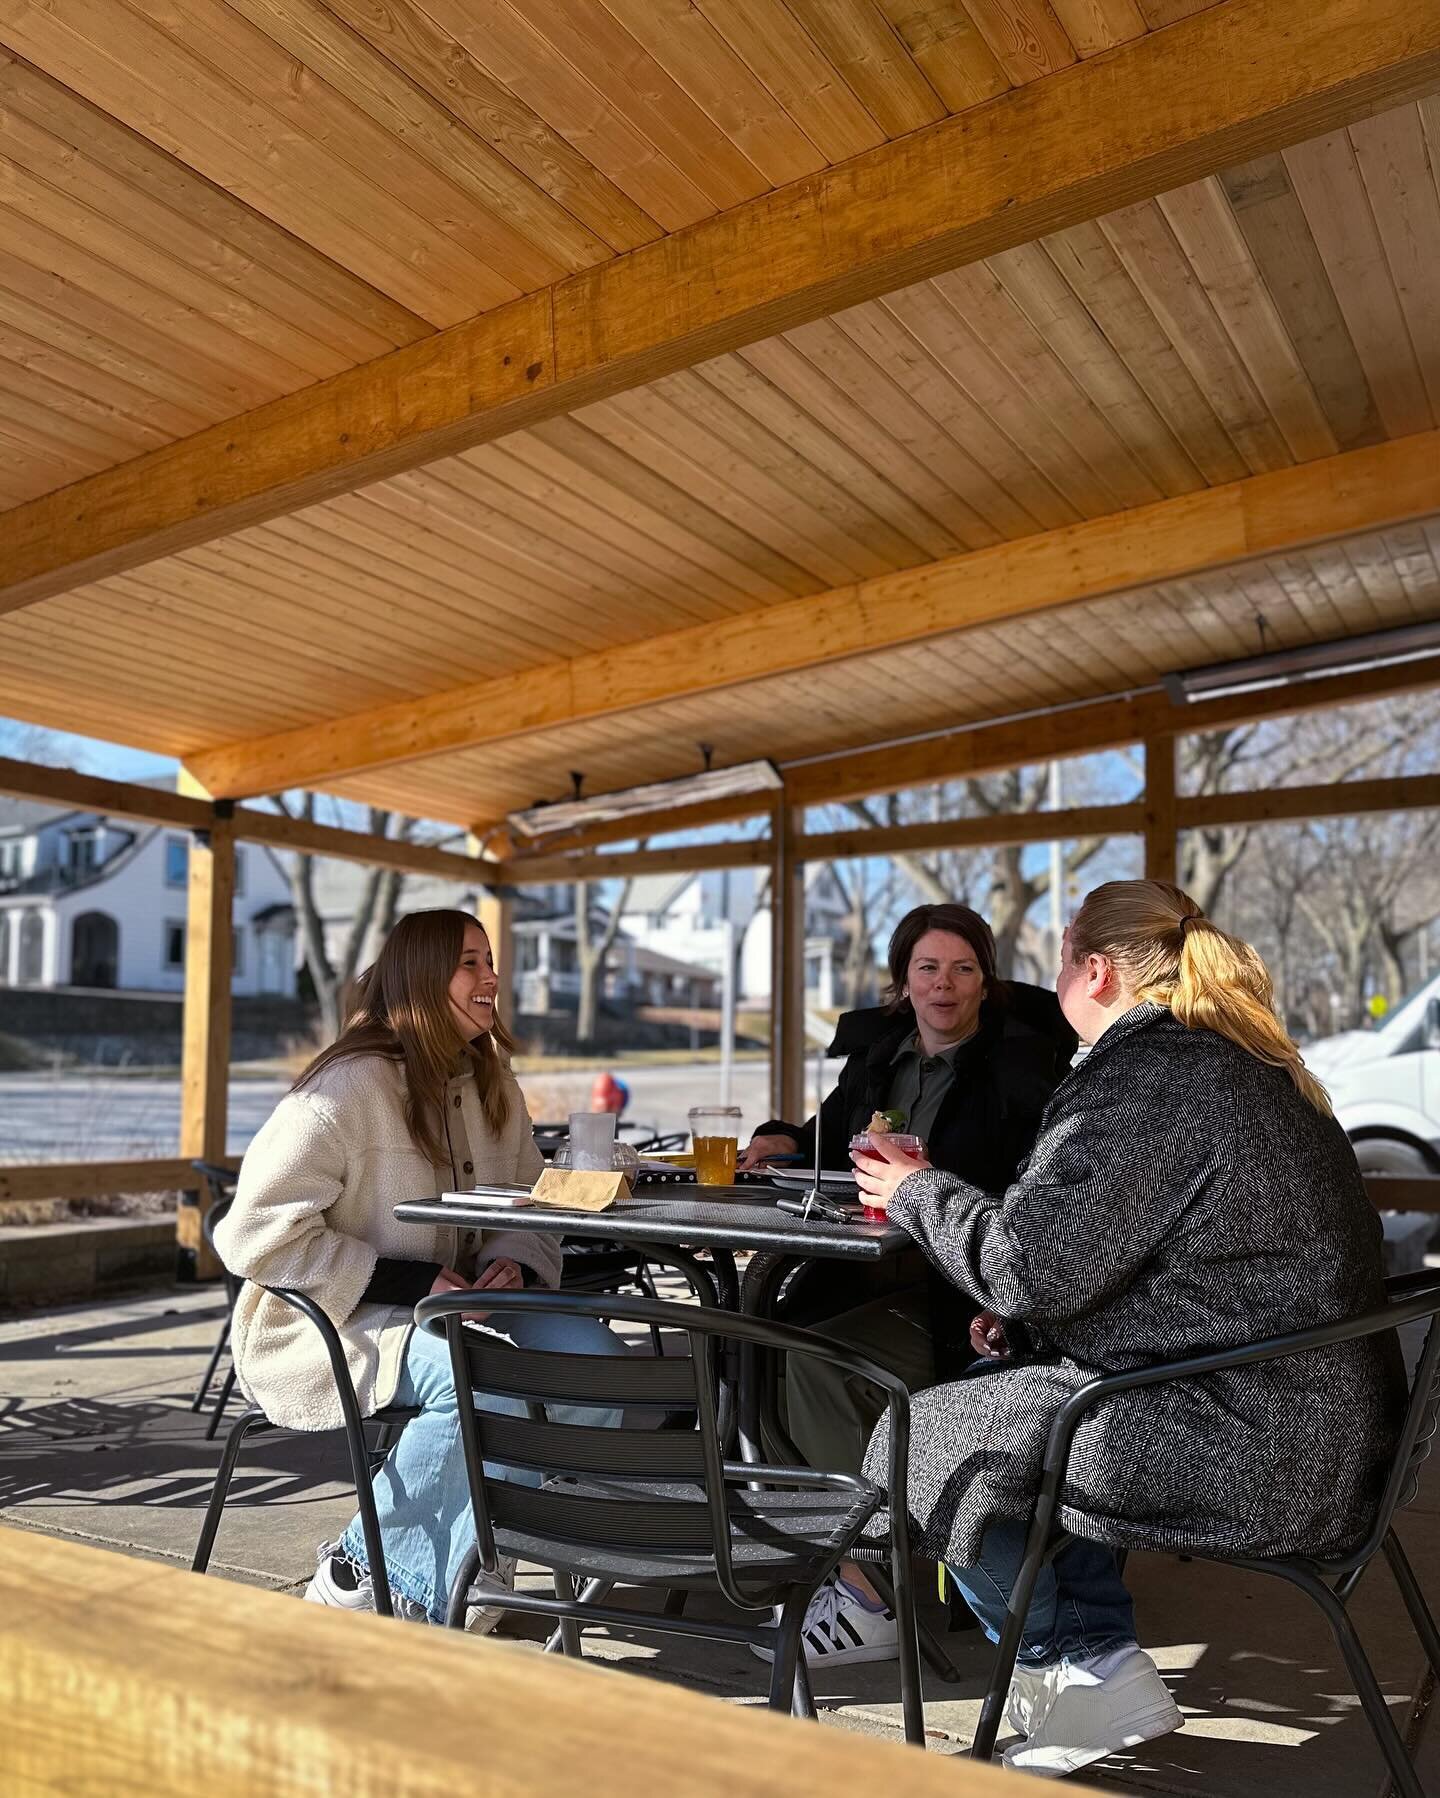 Are you warm enough? 
Sure it&rsquo;s a little chilly outside, but that won&rsquo;t stop us&hellip; we&rsquo;re too busy enjoying our new covered and also HEATED patio!
Bring your pals, your kids, or your furry kids (pets) and join us for a toasty an